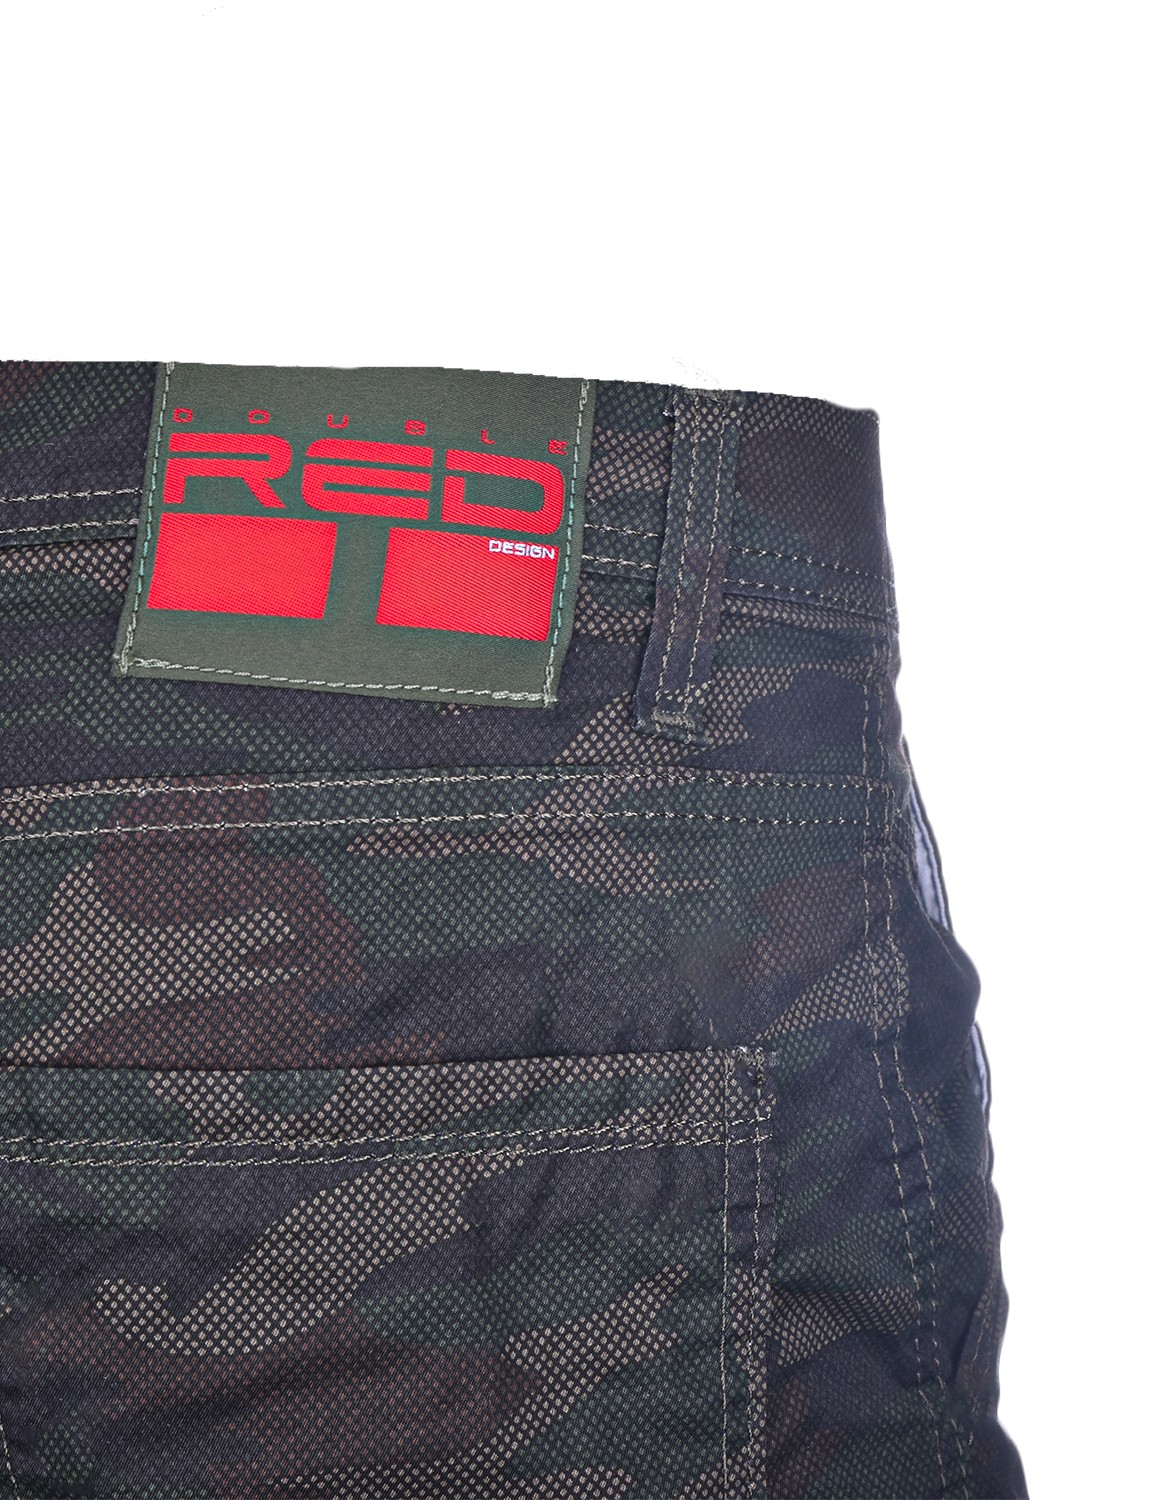 Soldier Camo Green Pants